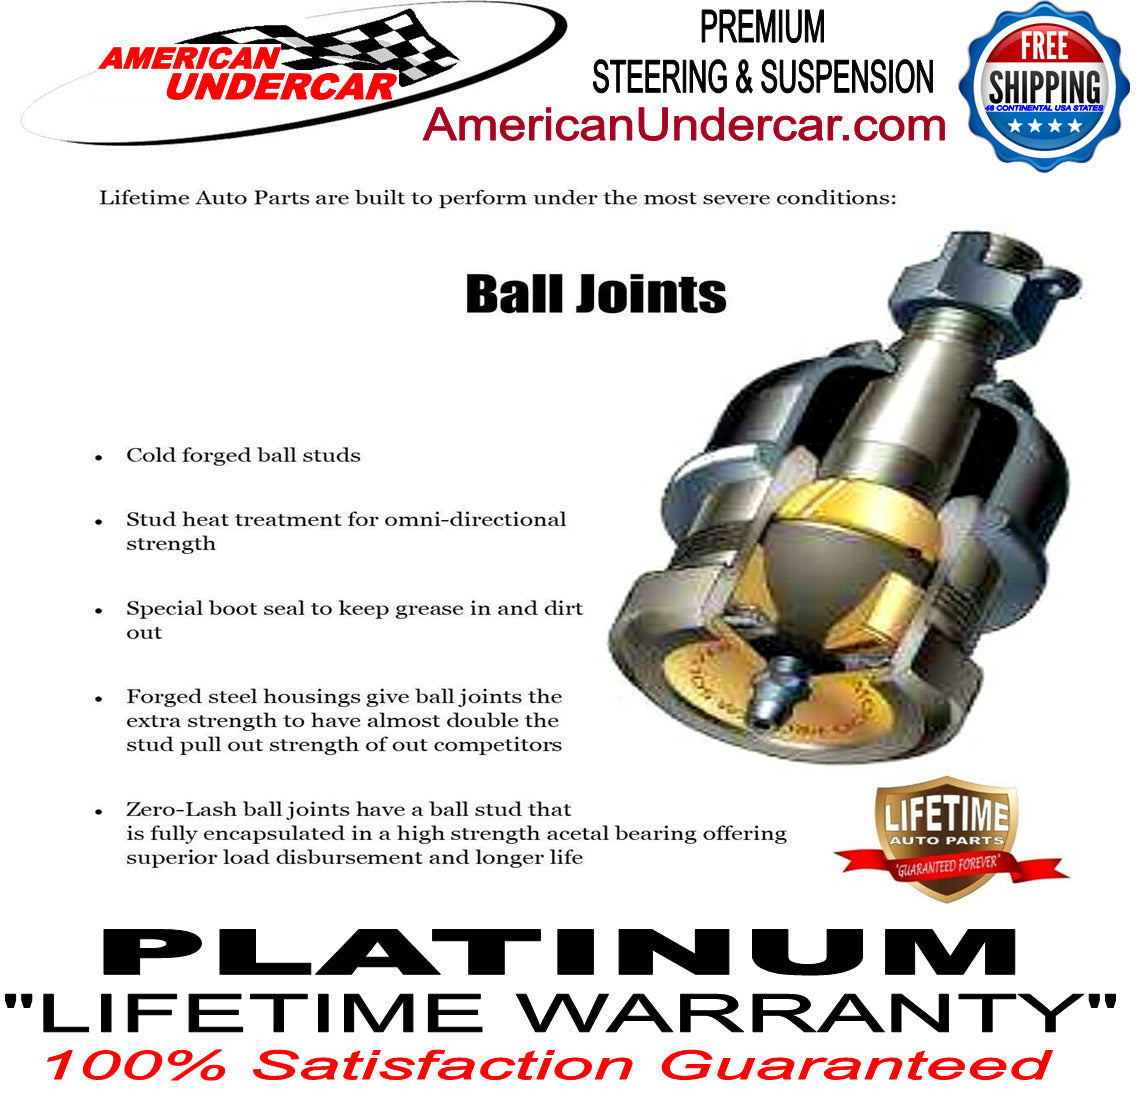 Lifetime Upper & Lower Ball Joint Suspension Kit for 2001-2010 Chevrolet, GMC, 1500HD, 2500HD, 3500HD 2WD, 4x4